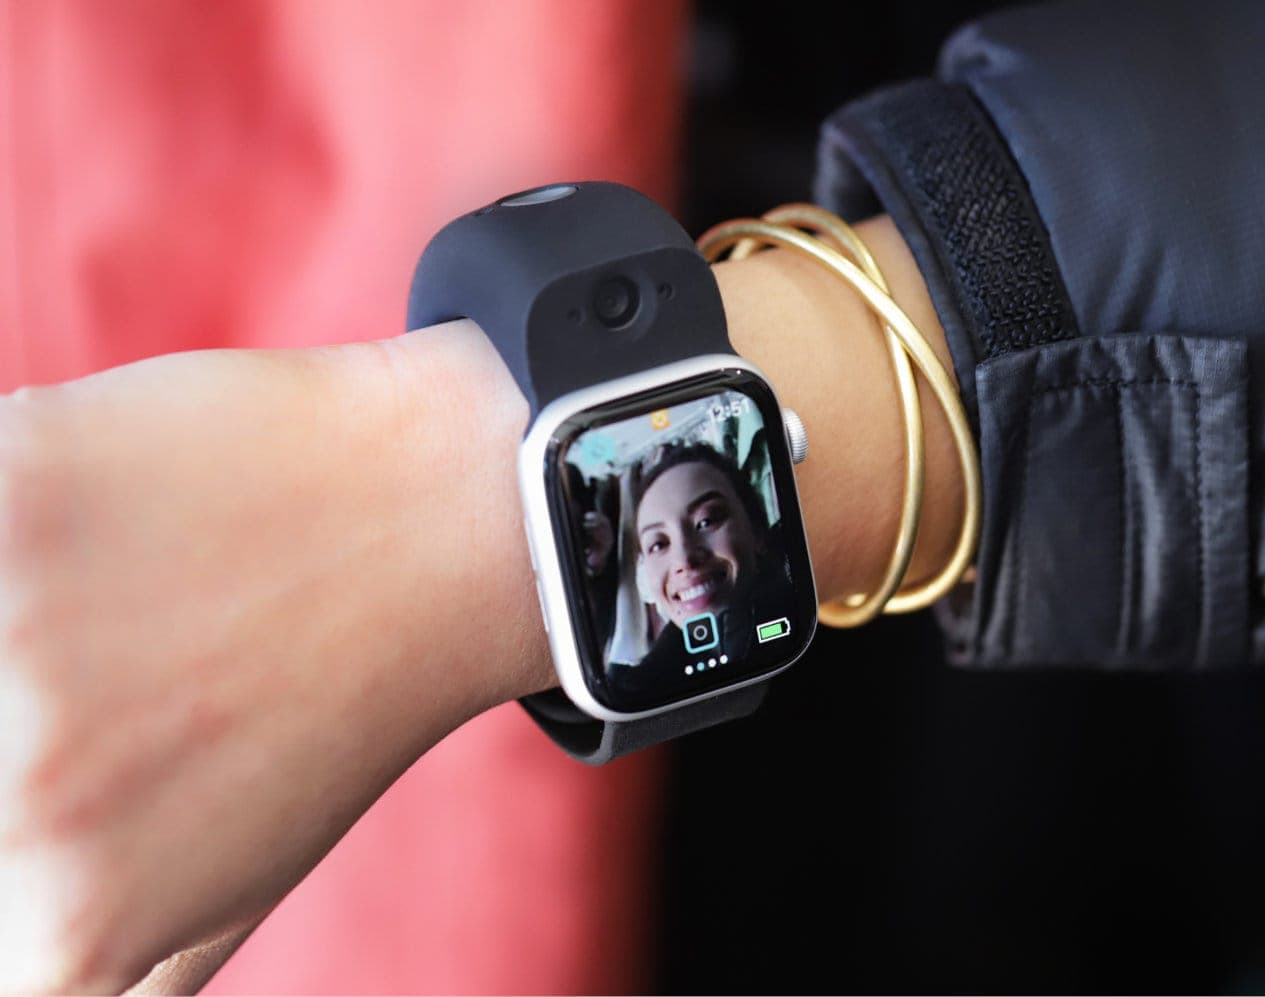 Wristcam adds FaceTime-like video calling to Apple Watch.